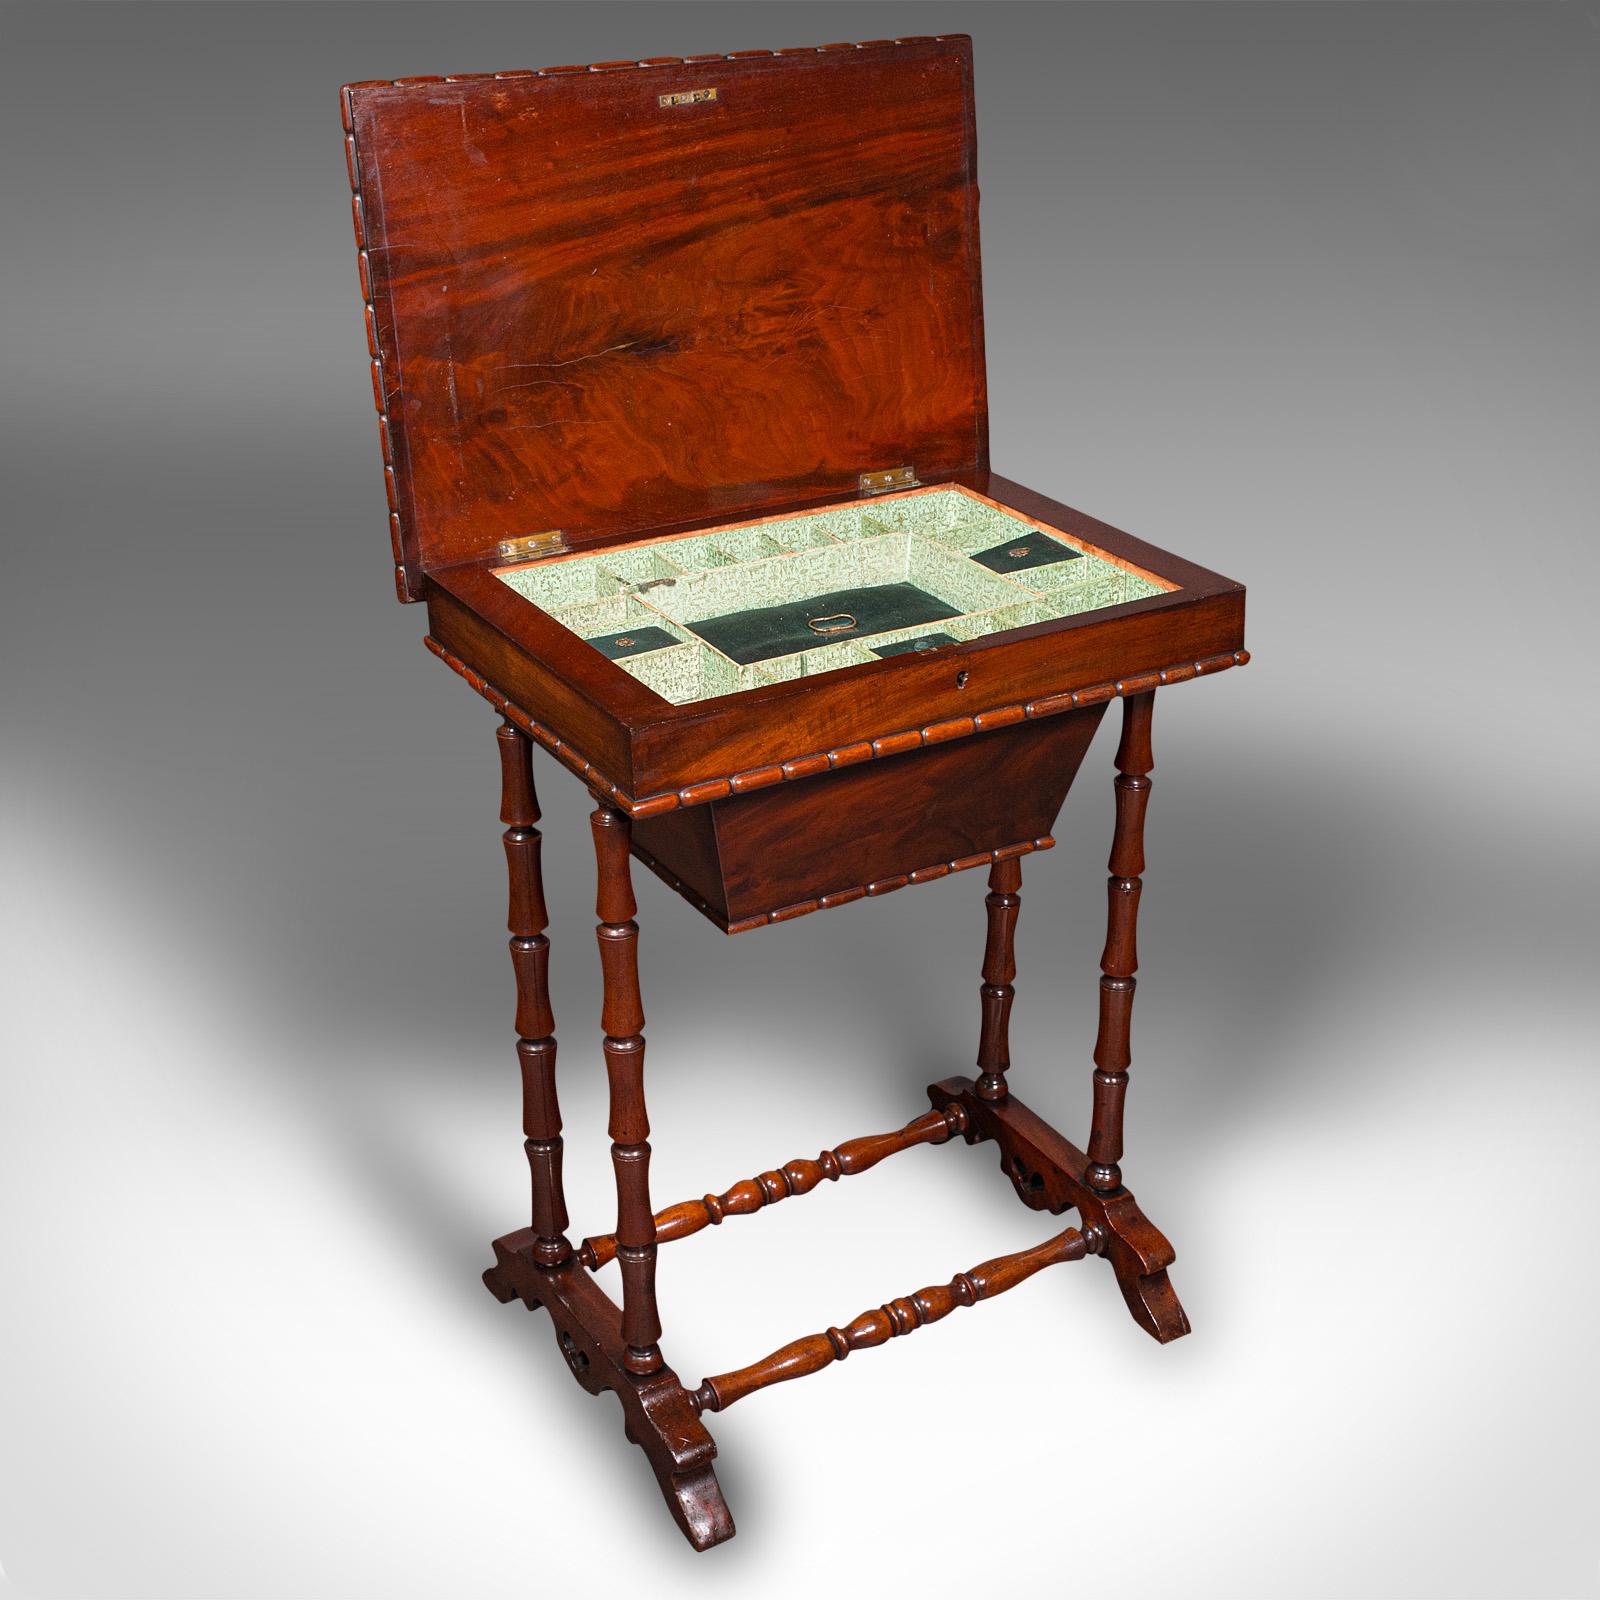 This is an antique sewing table. An English, flame mahogany ladies work table, dating to the late Regency period, circa 1830.

Dashing example, with superb colour and form
Displays a desirable aged patina and in good order
Select stocks present fine